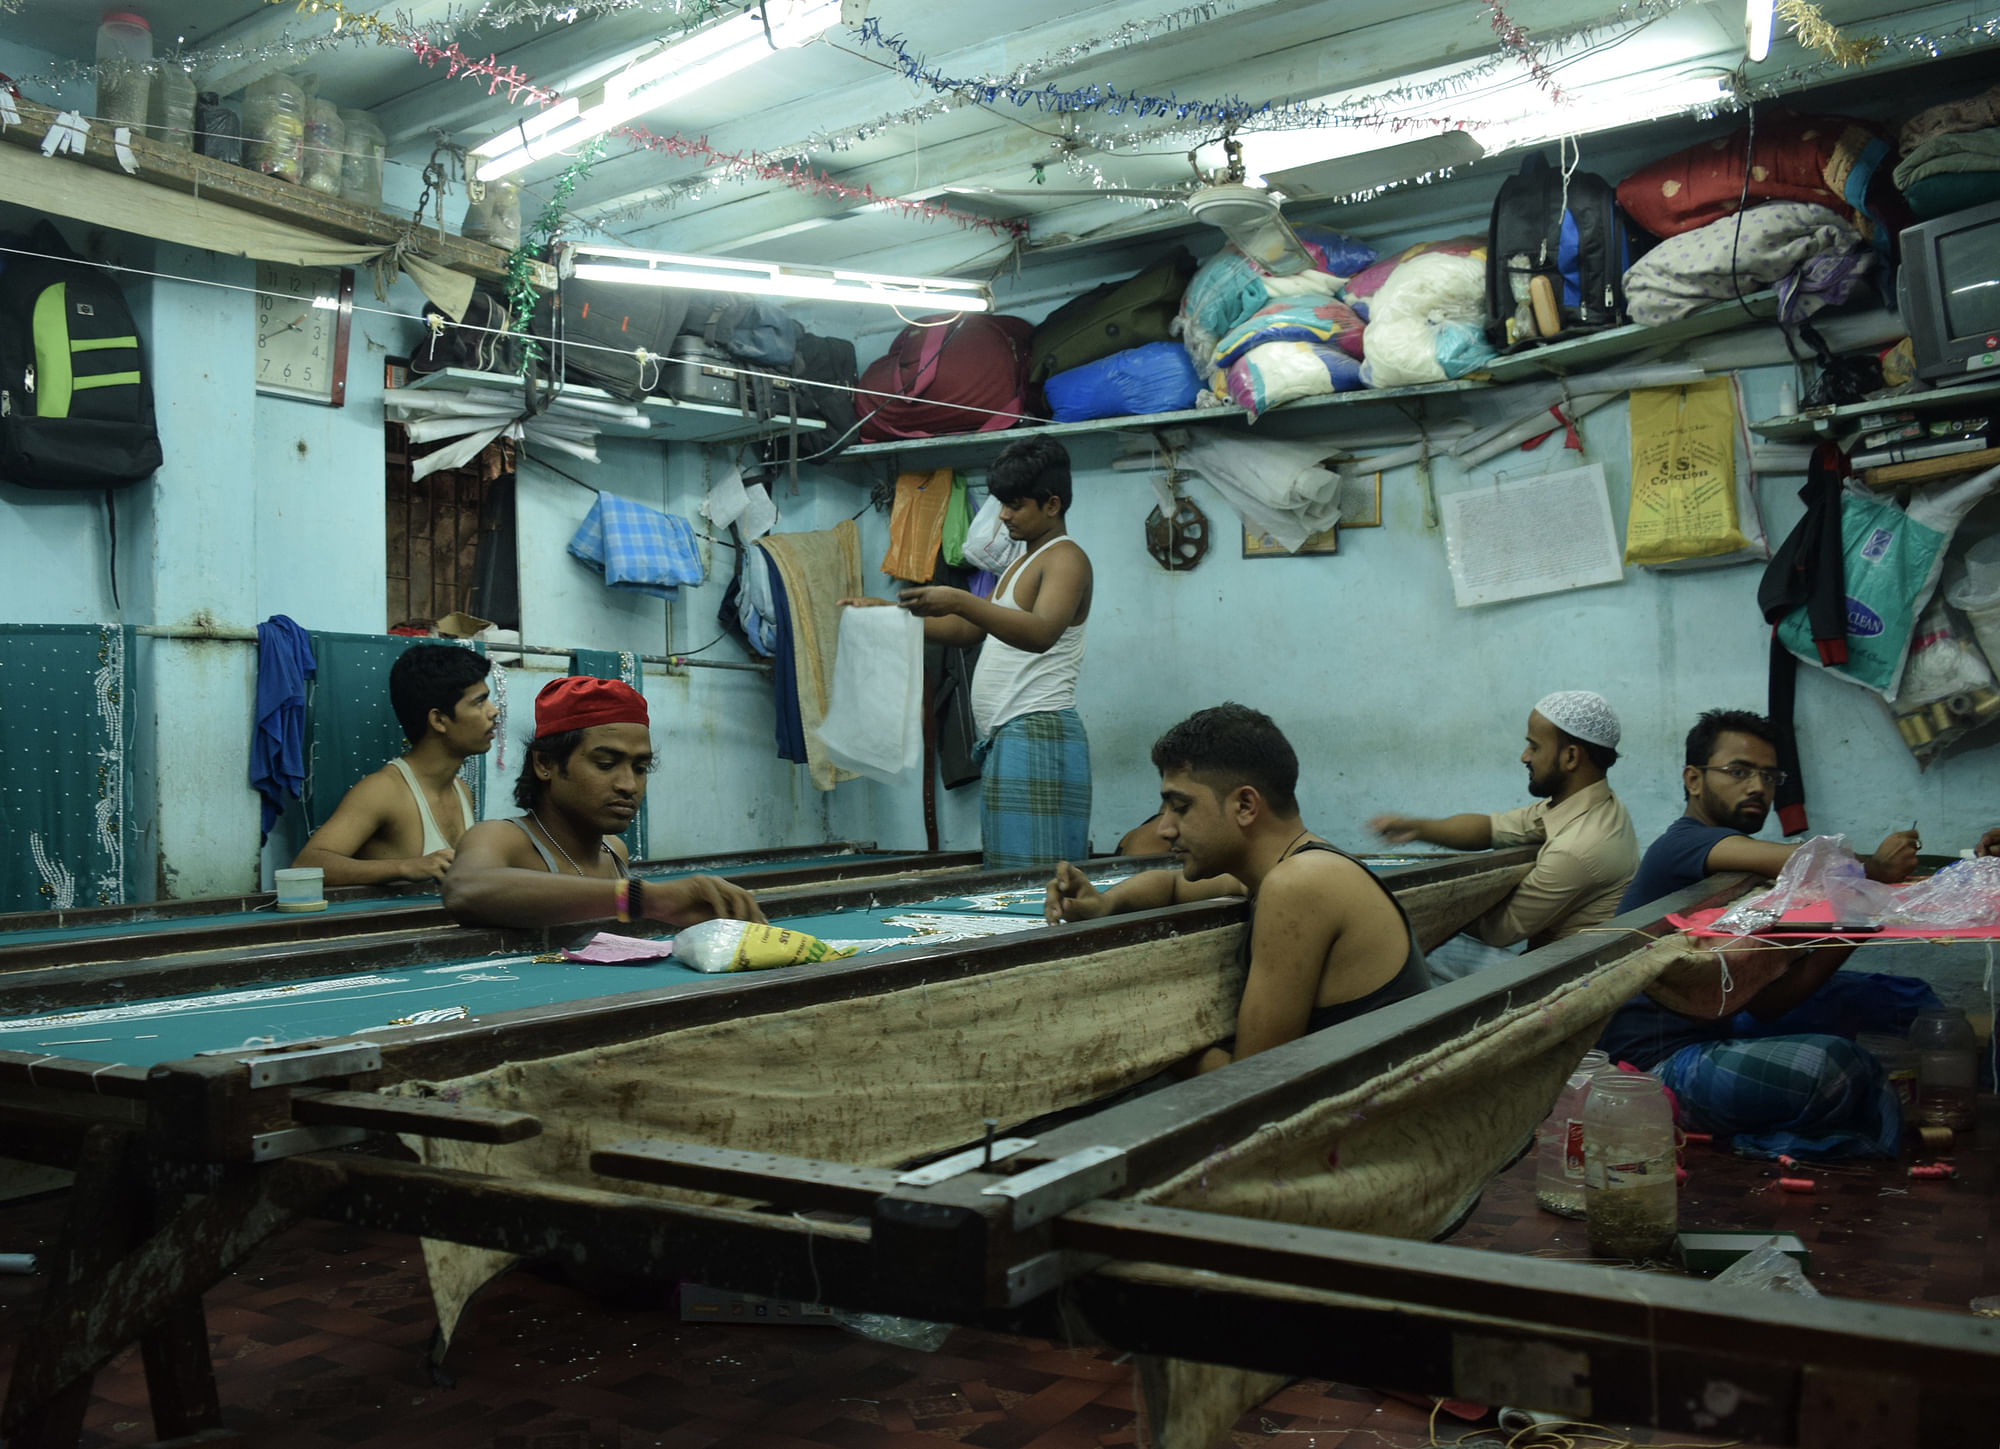 Workers embroider cloth is a small sweatshop in Dharavi. (Photo: Pallavi Prasad)